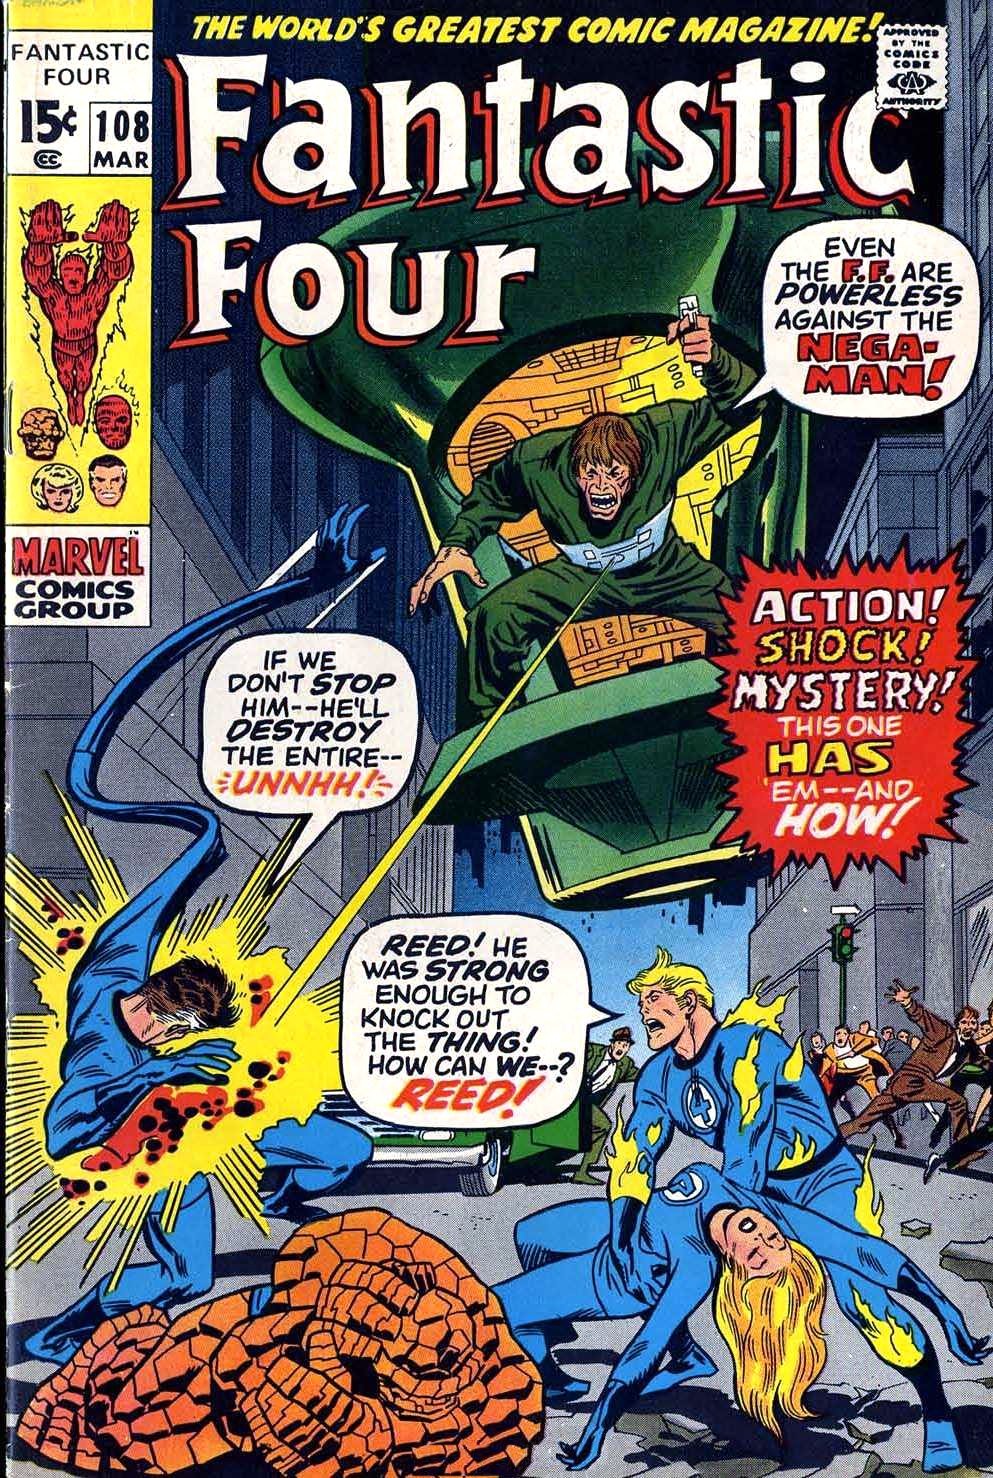 themarvelwayoflife:  Original and reprint. Fantastic Four #108 (1971) by John Buscema